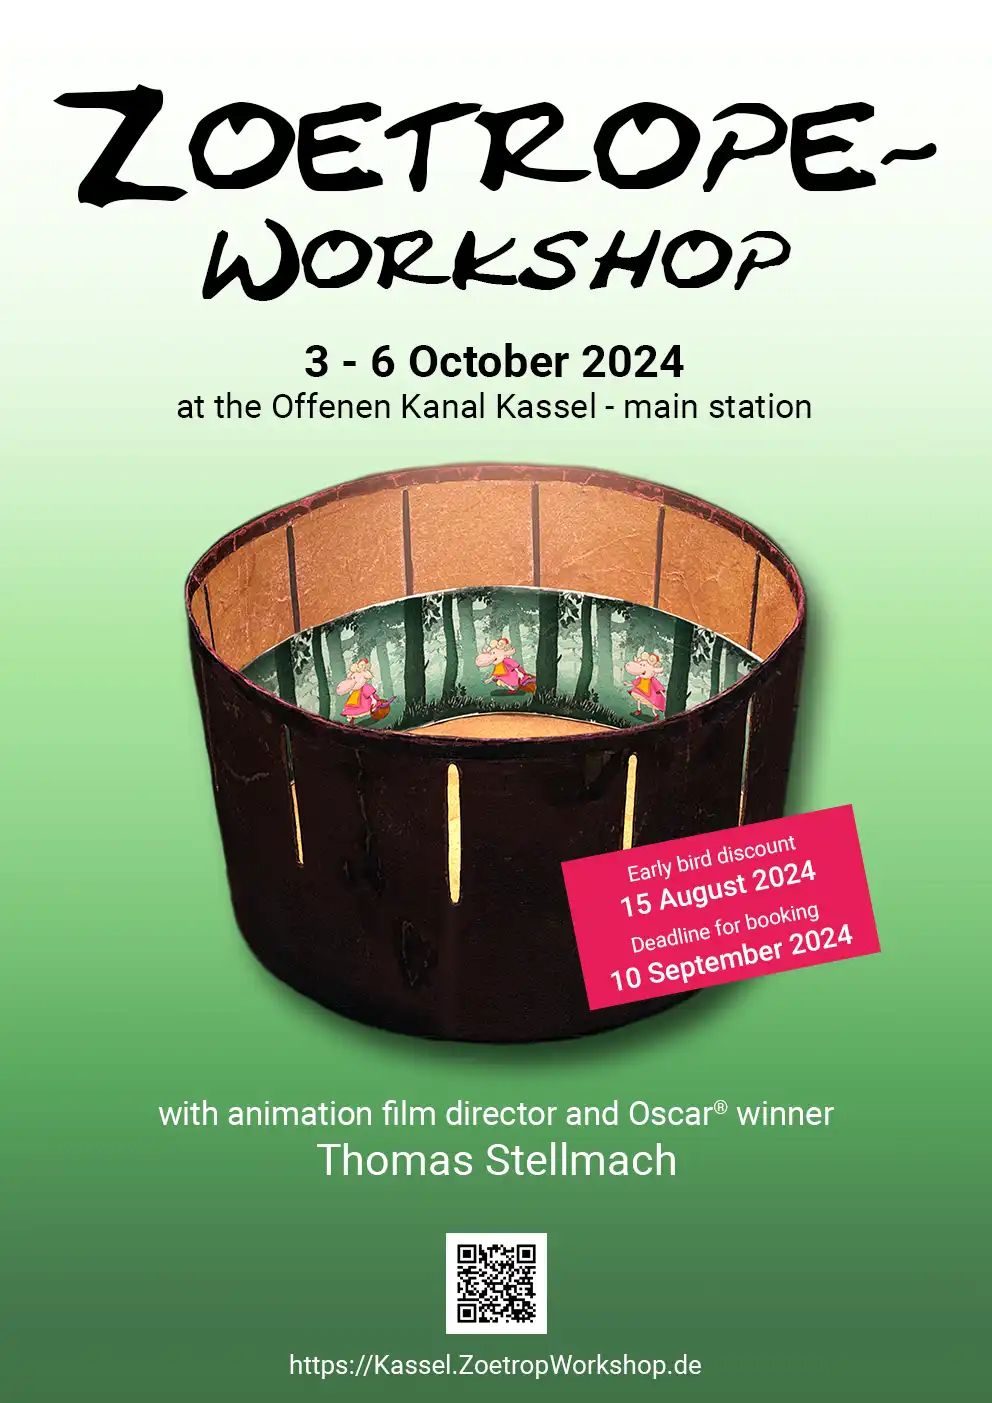 Poster Zoetrope workshop with Thomas Stellmach on 3-6 October 2024 in Kassel